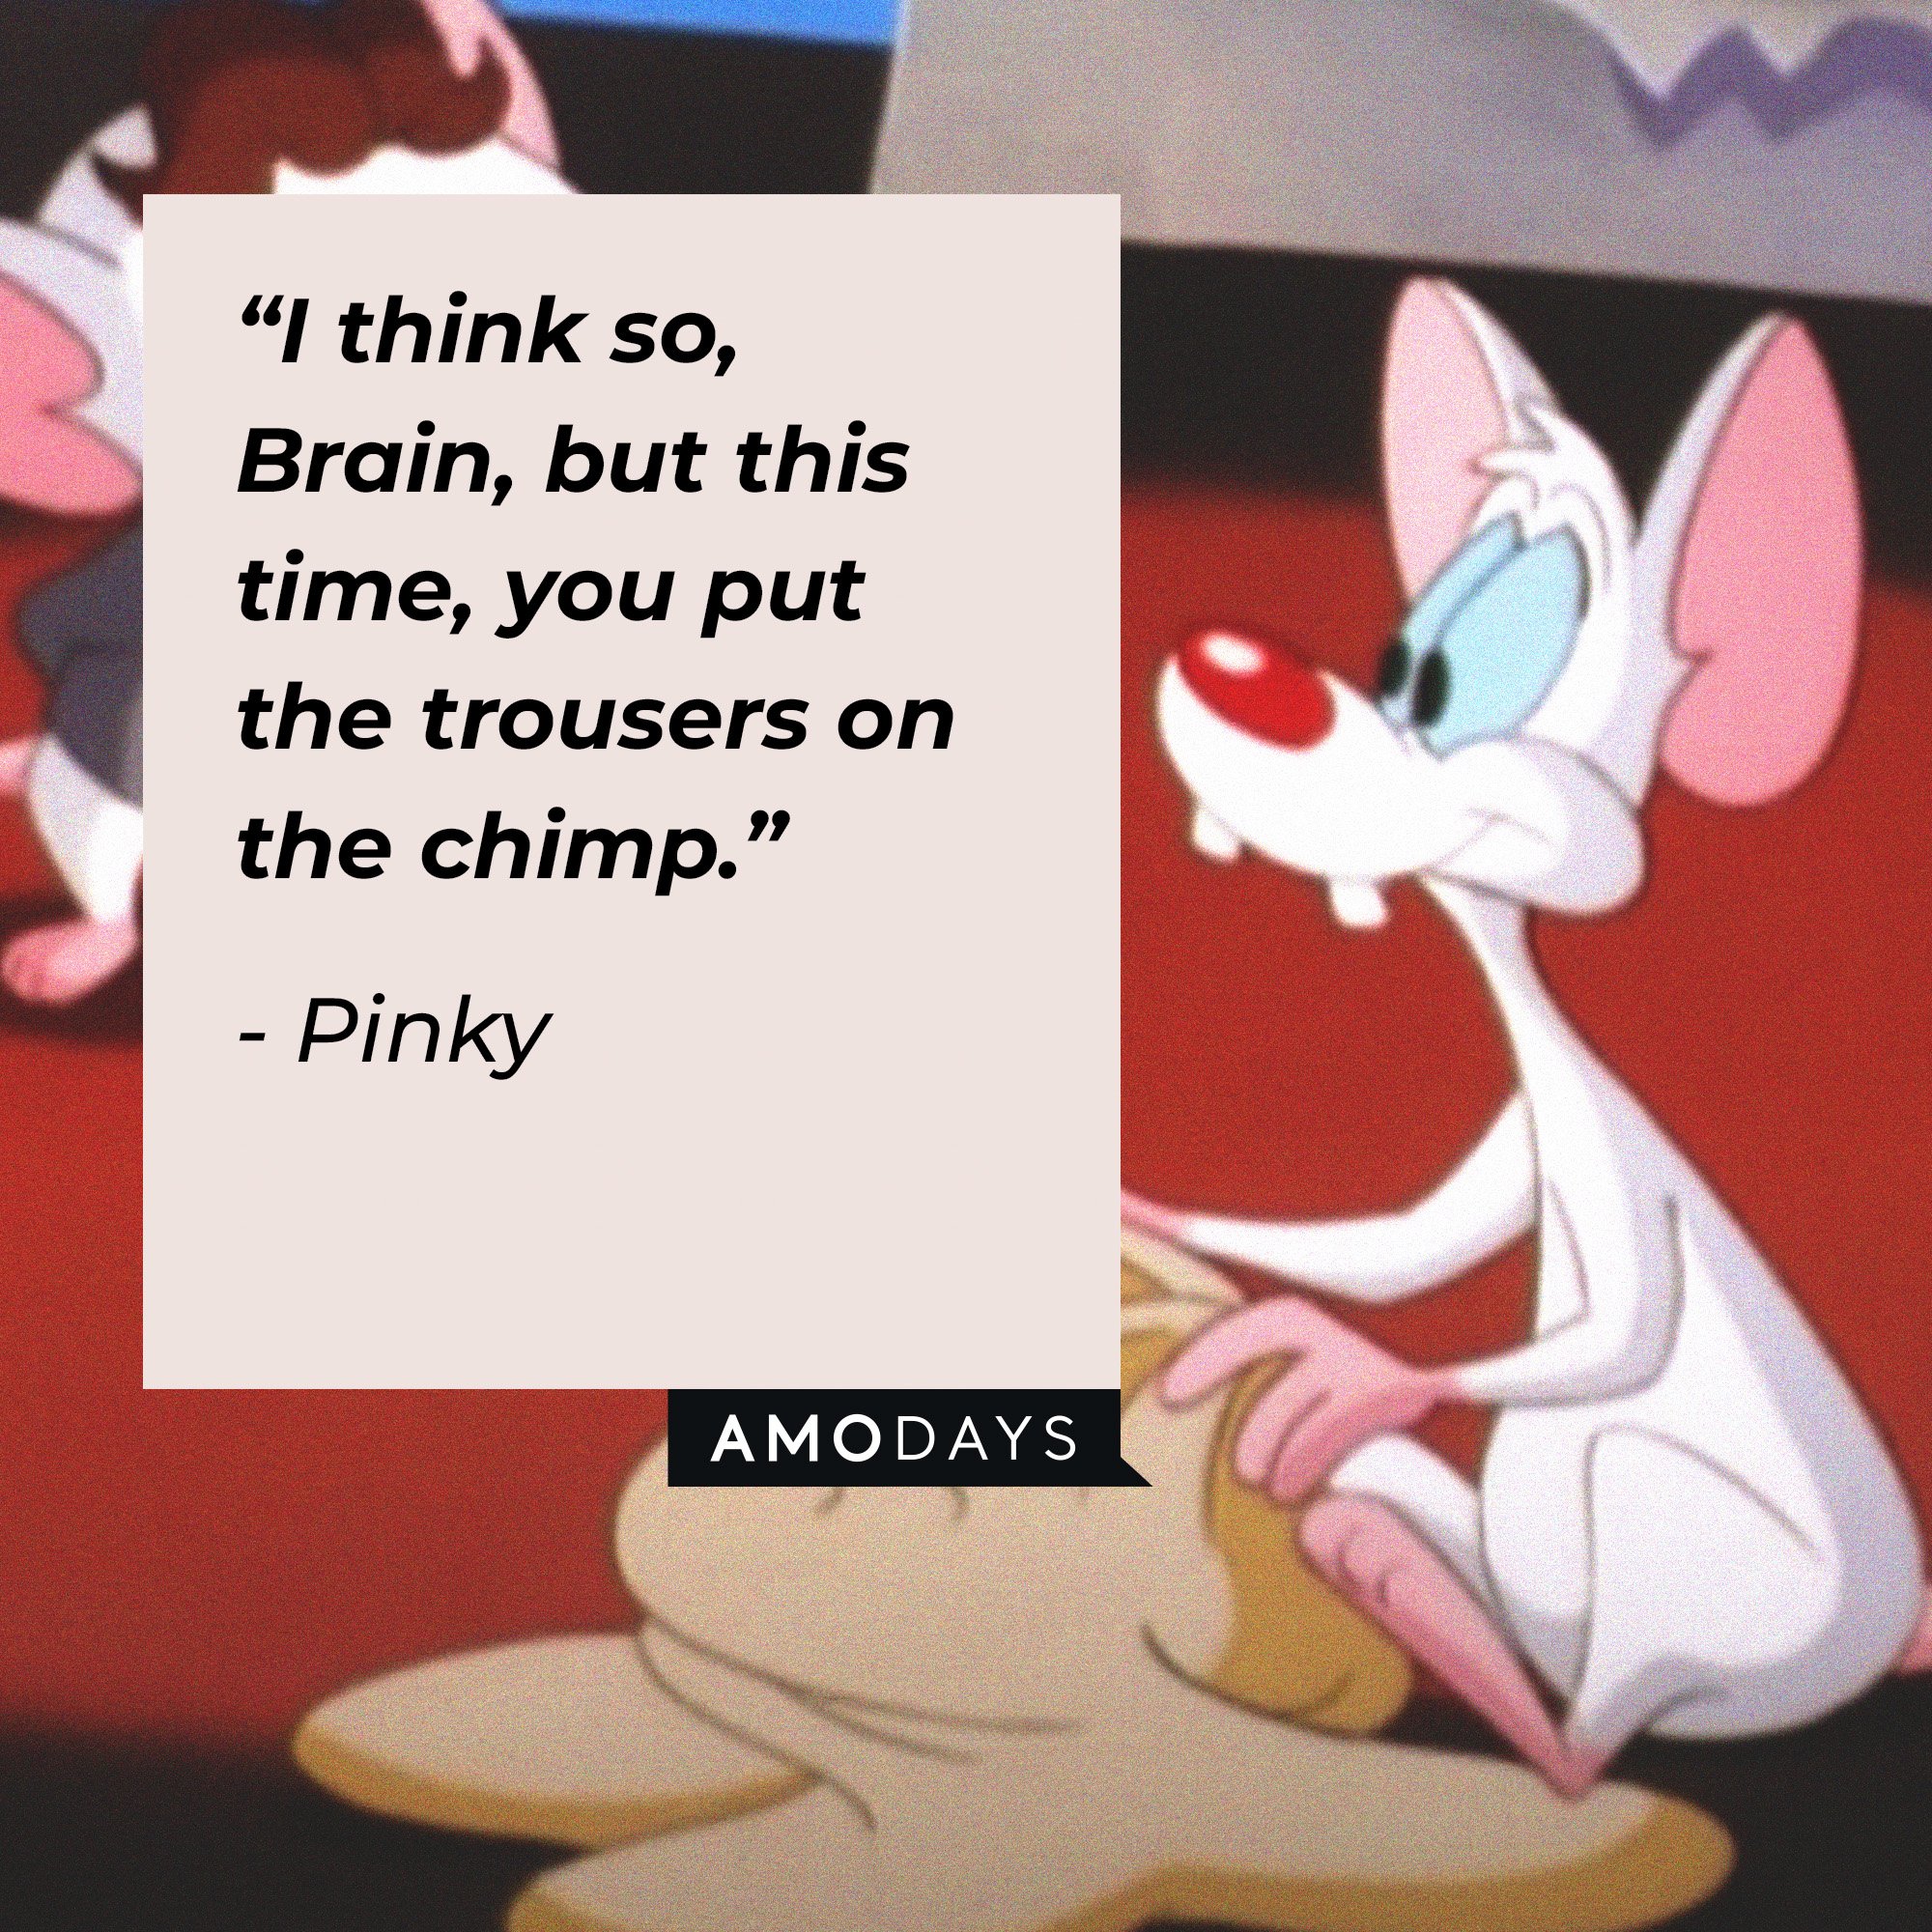 Pinky's quote: “I think so, Brain, but this time, you put the trousers on the chimp.” | Image: AmoDays